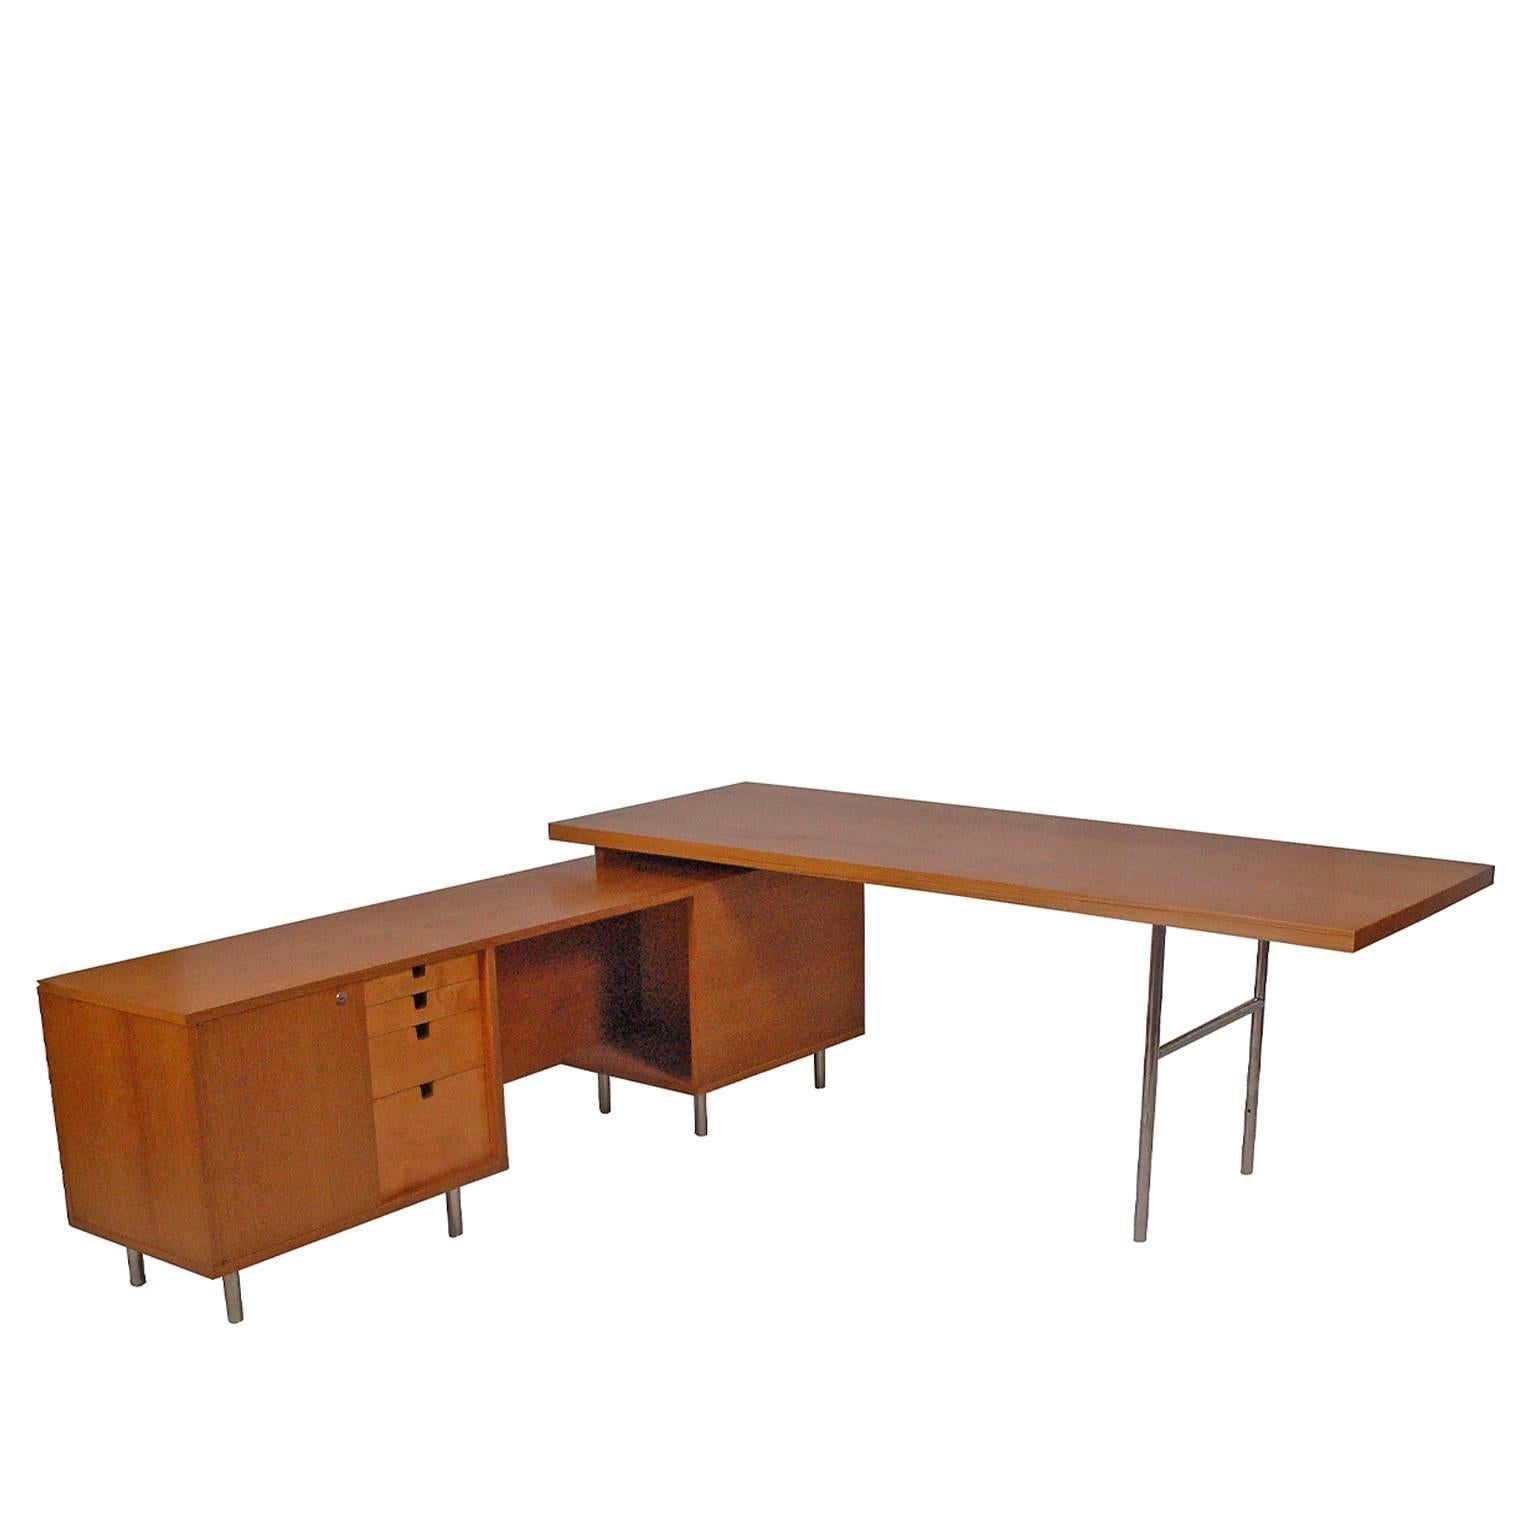 American Executive Office Group Desk by George Nelson 1952 for Herman Miller